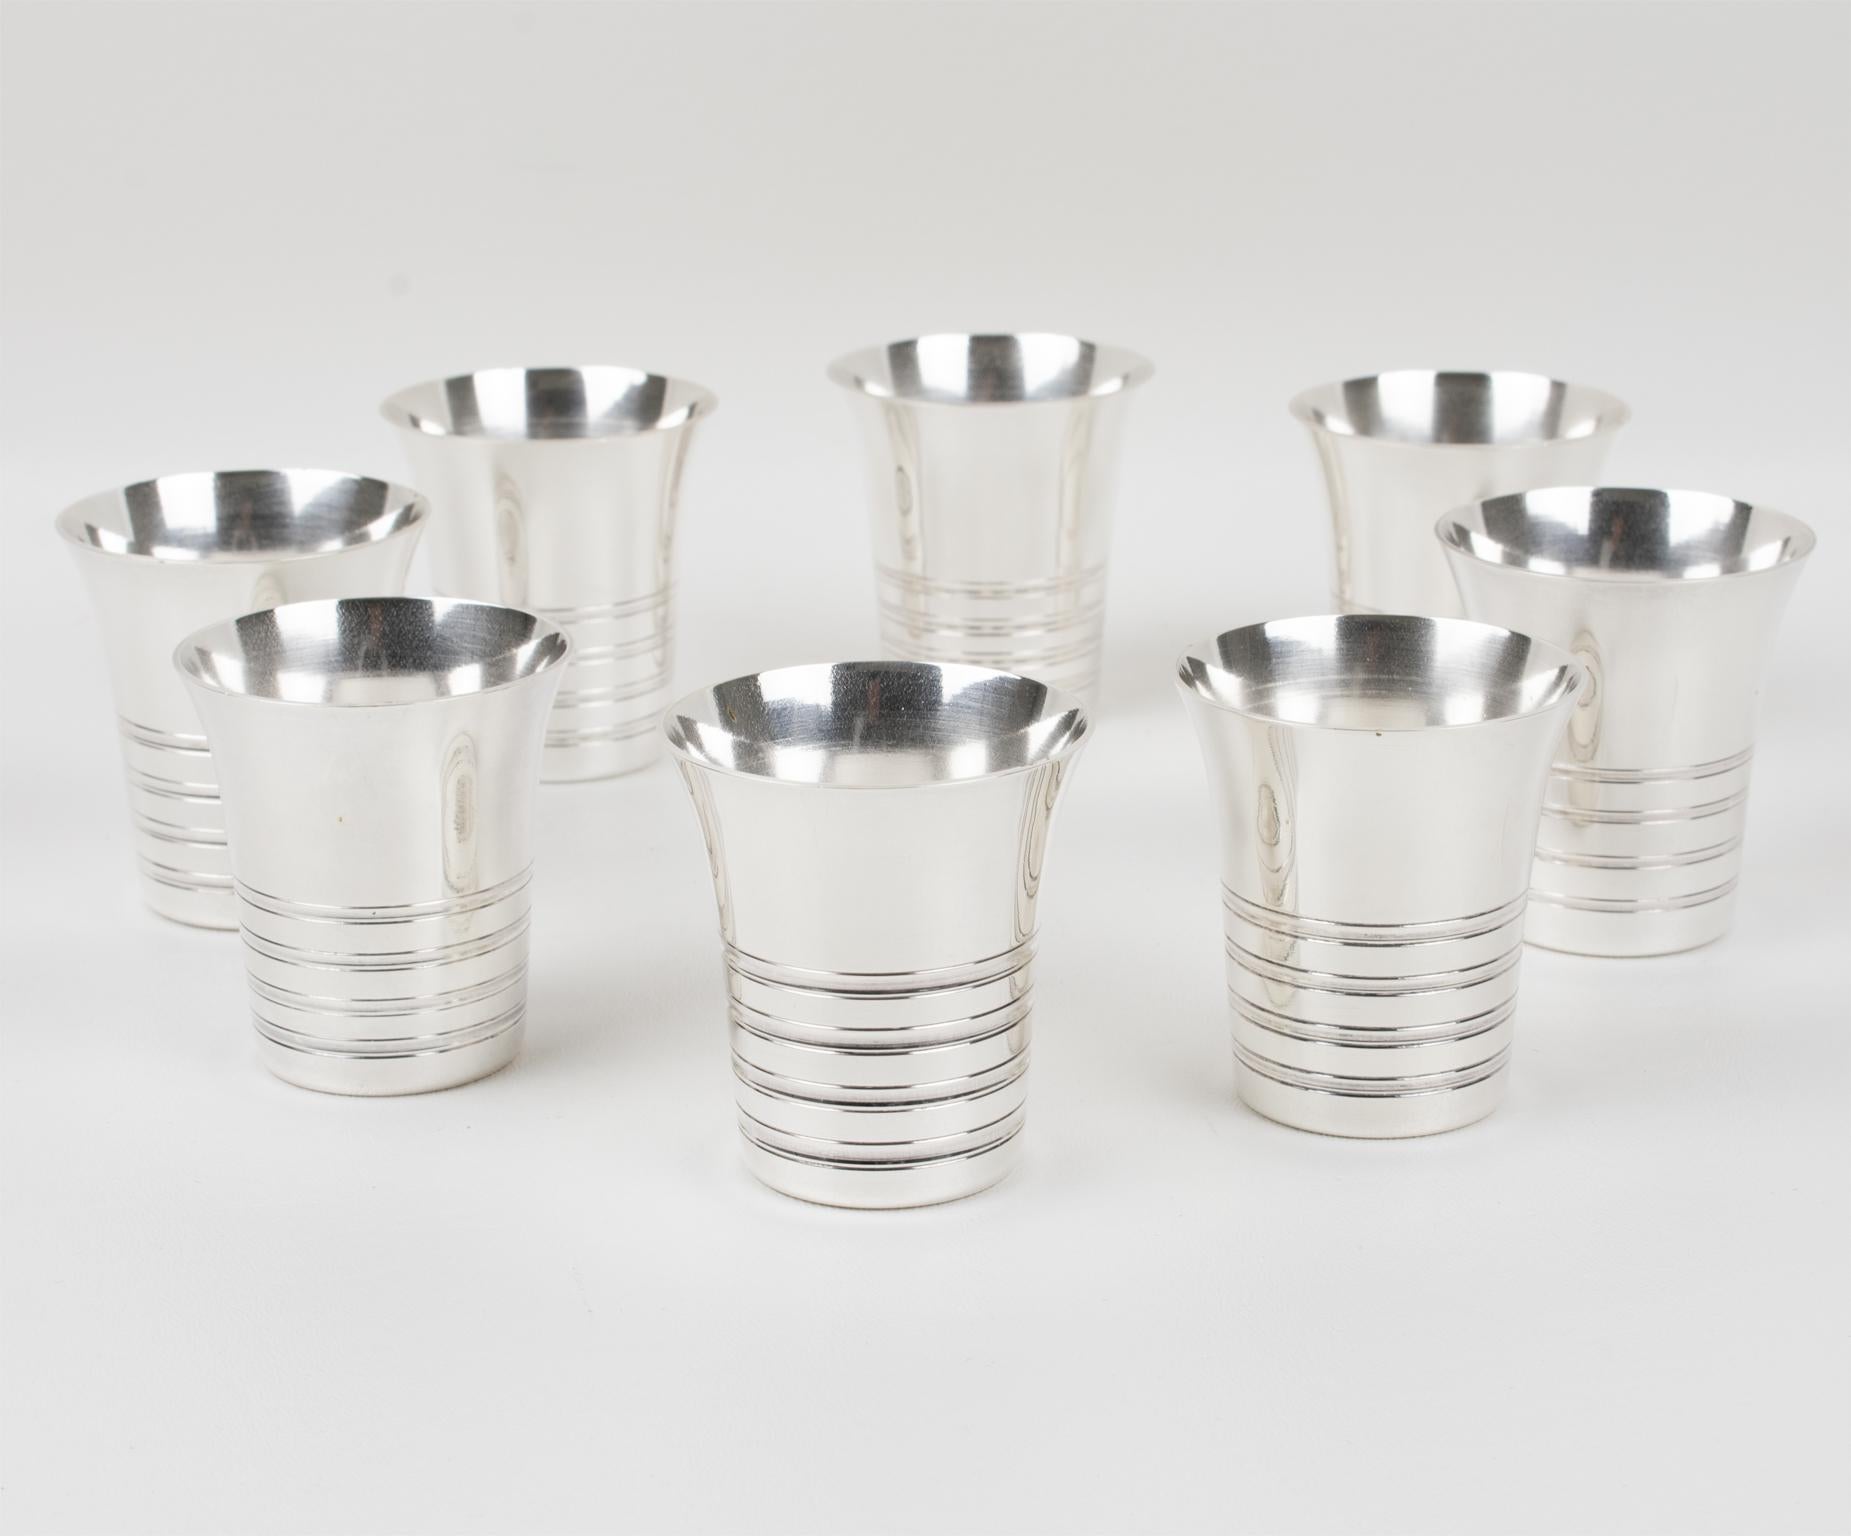 Art Deco Silver Plate Cocktail Shaker and Eight Barware Glasses, France 1940s For Sale 6